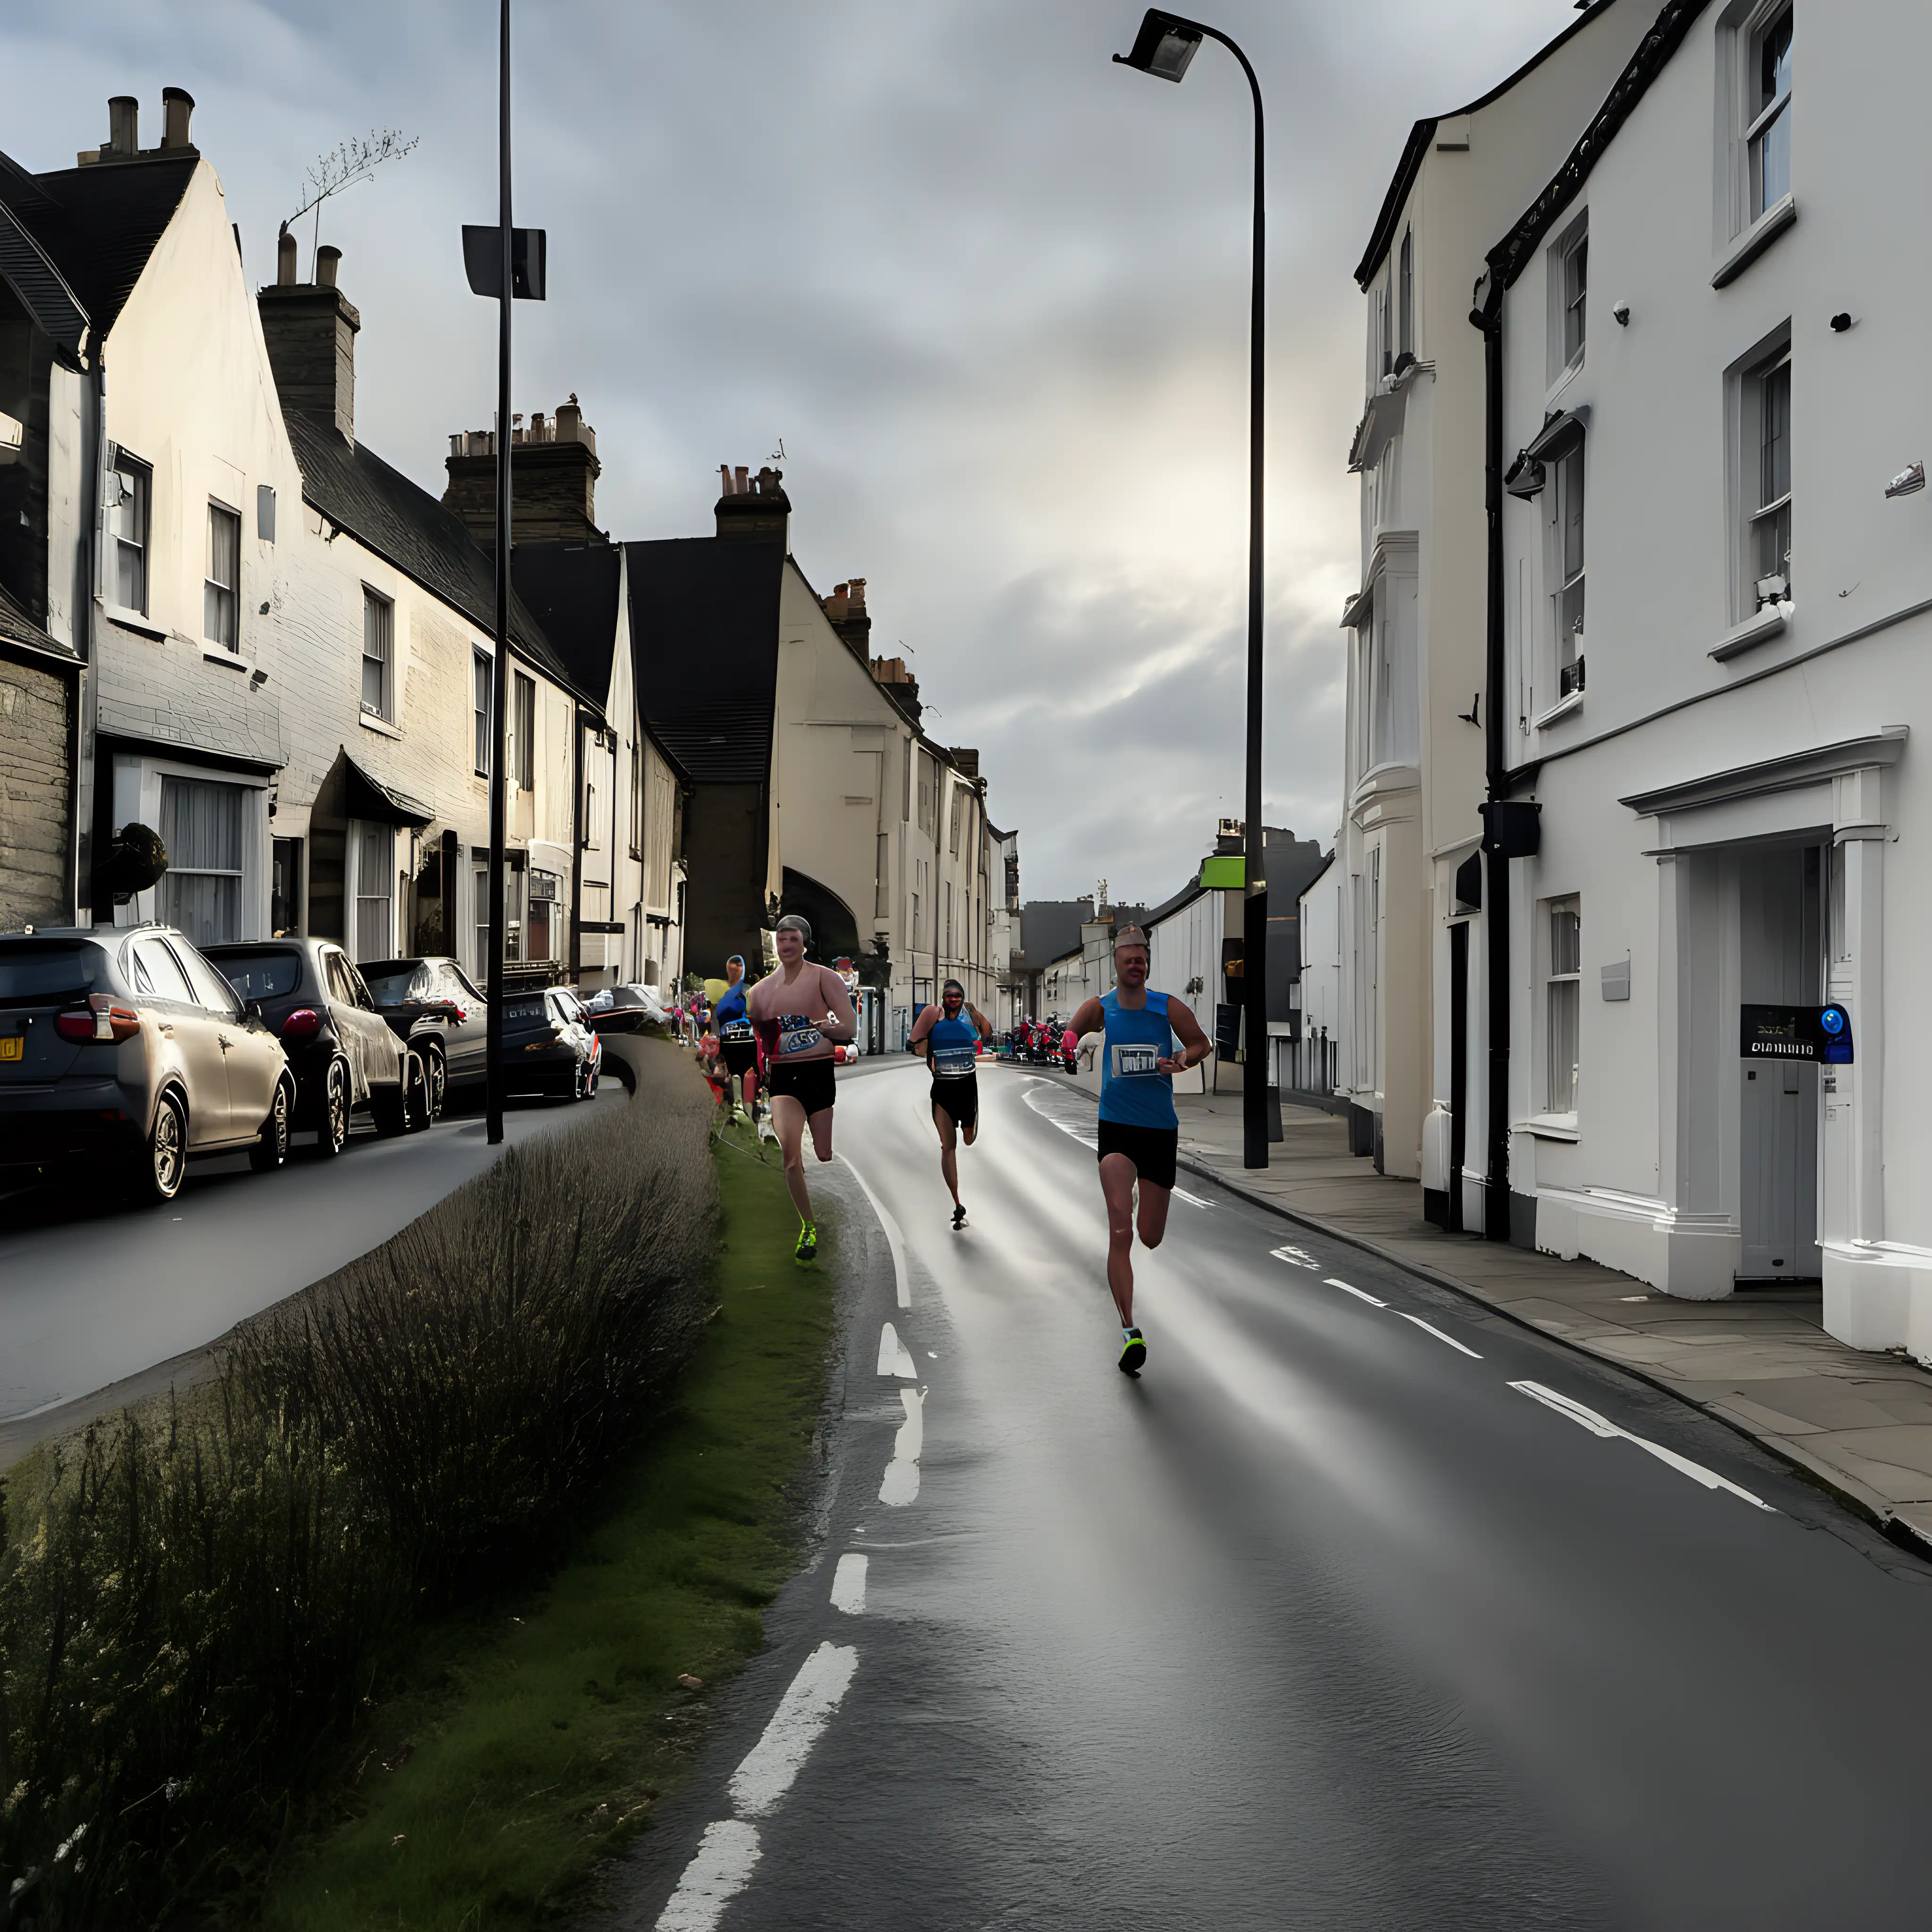 runners taking part in a road race down this street with no cars in picture